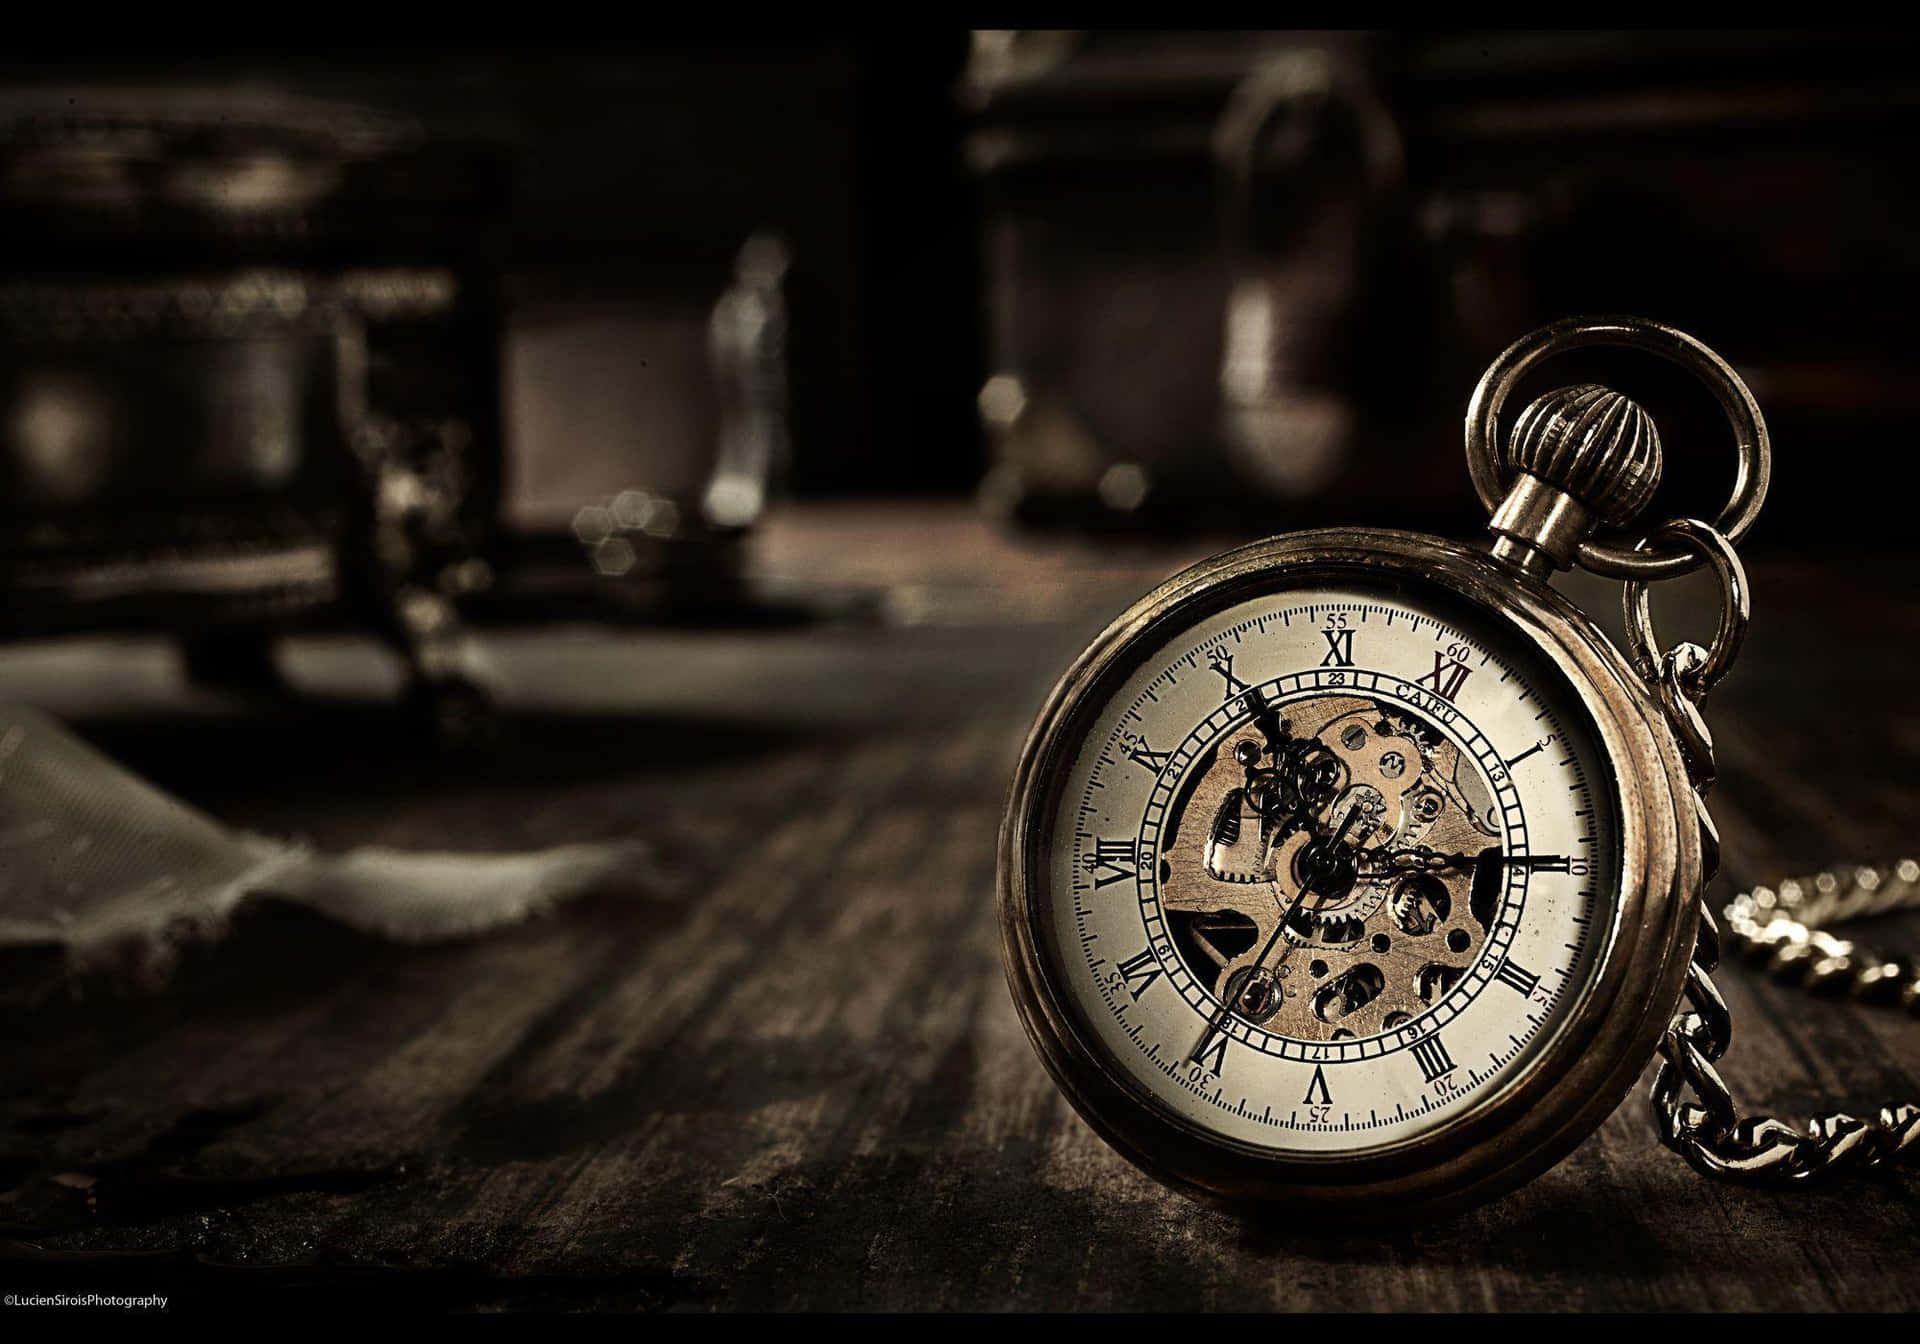 Image  Showing the beauty of time passing – an intricately designed clock in a vintage style